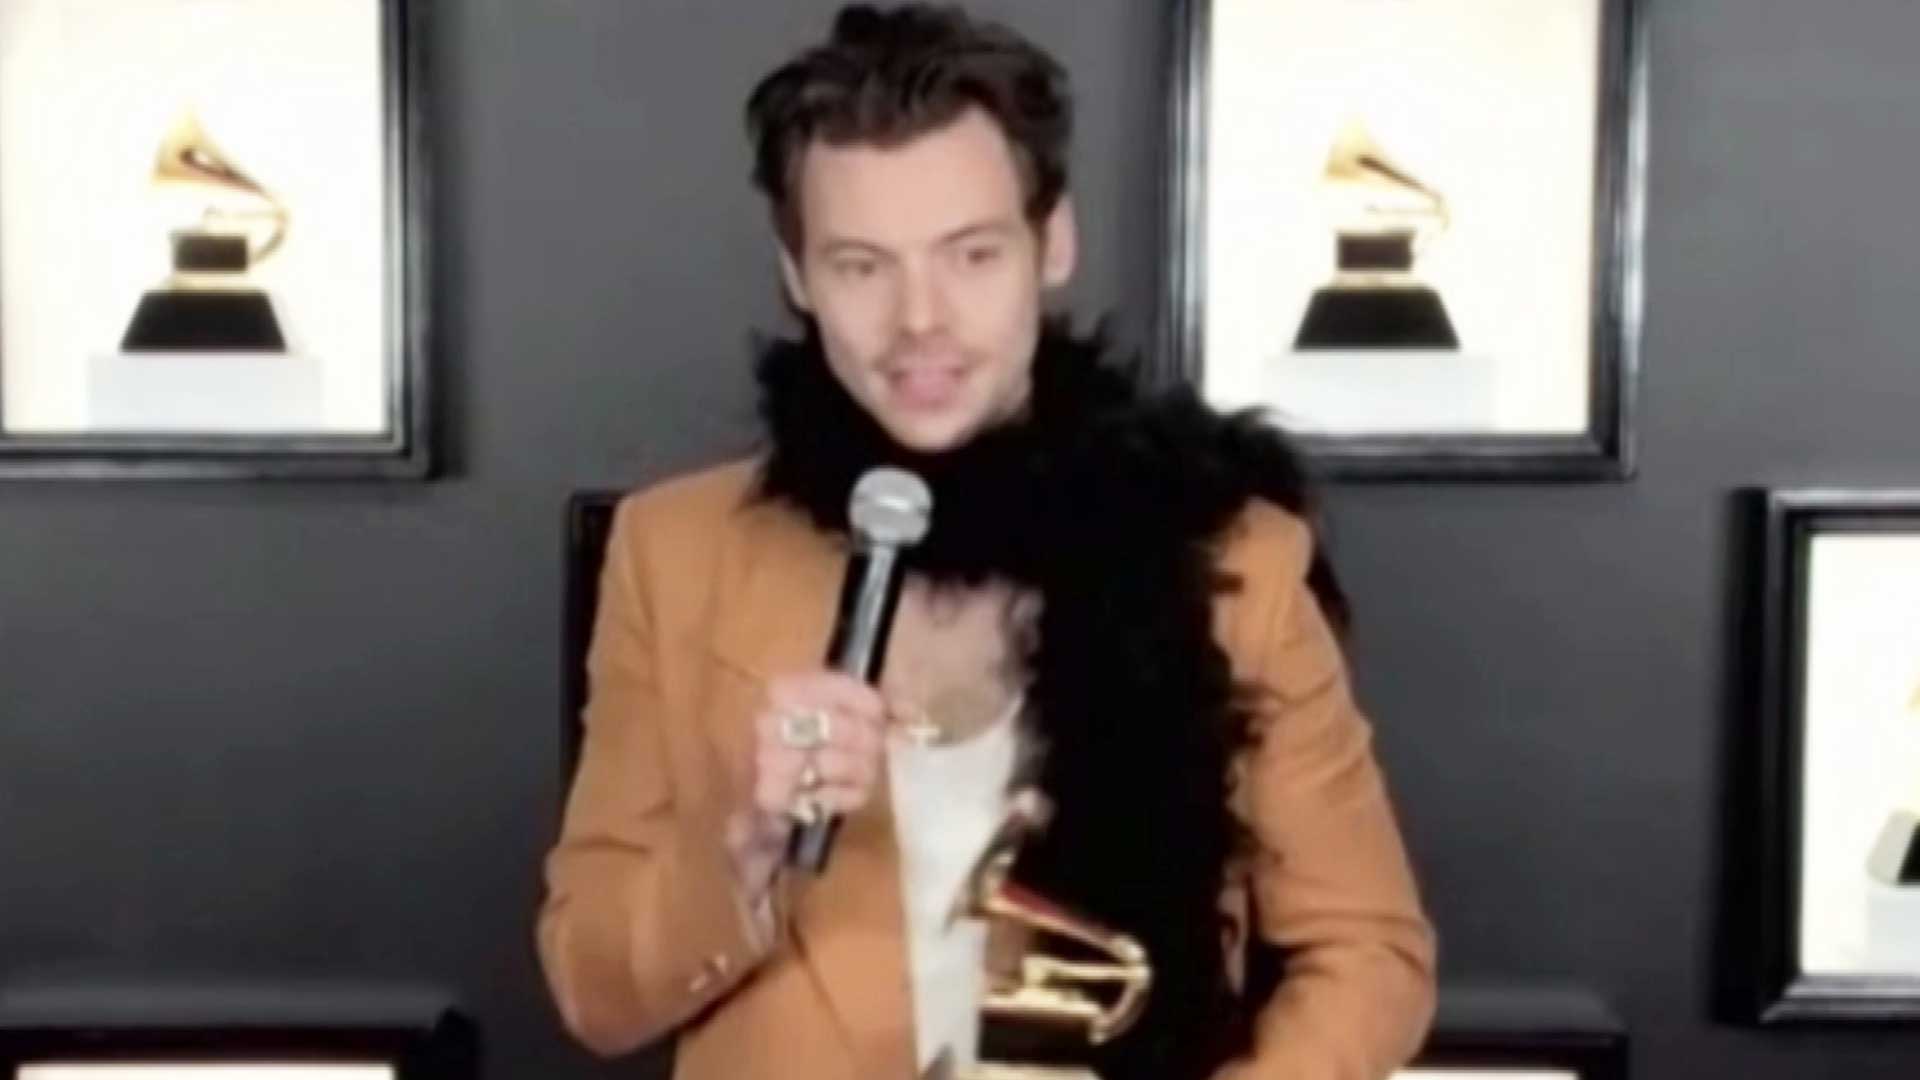 Grammys 2021: What Harry Styles Wore for the Awards Show